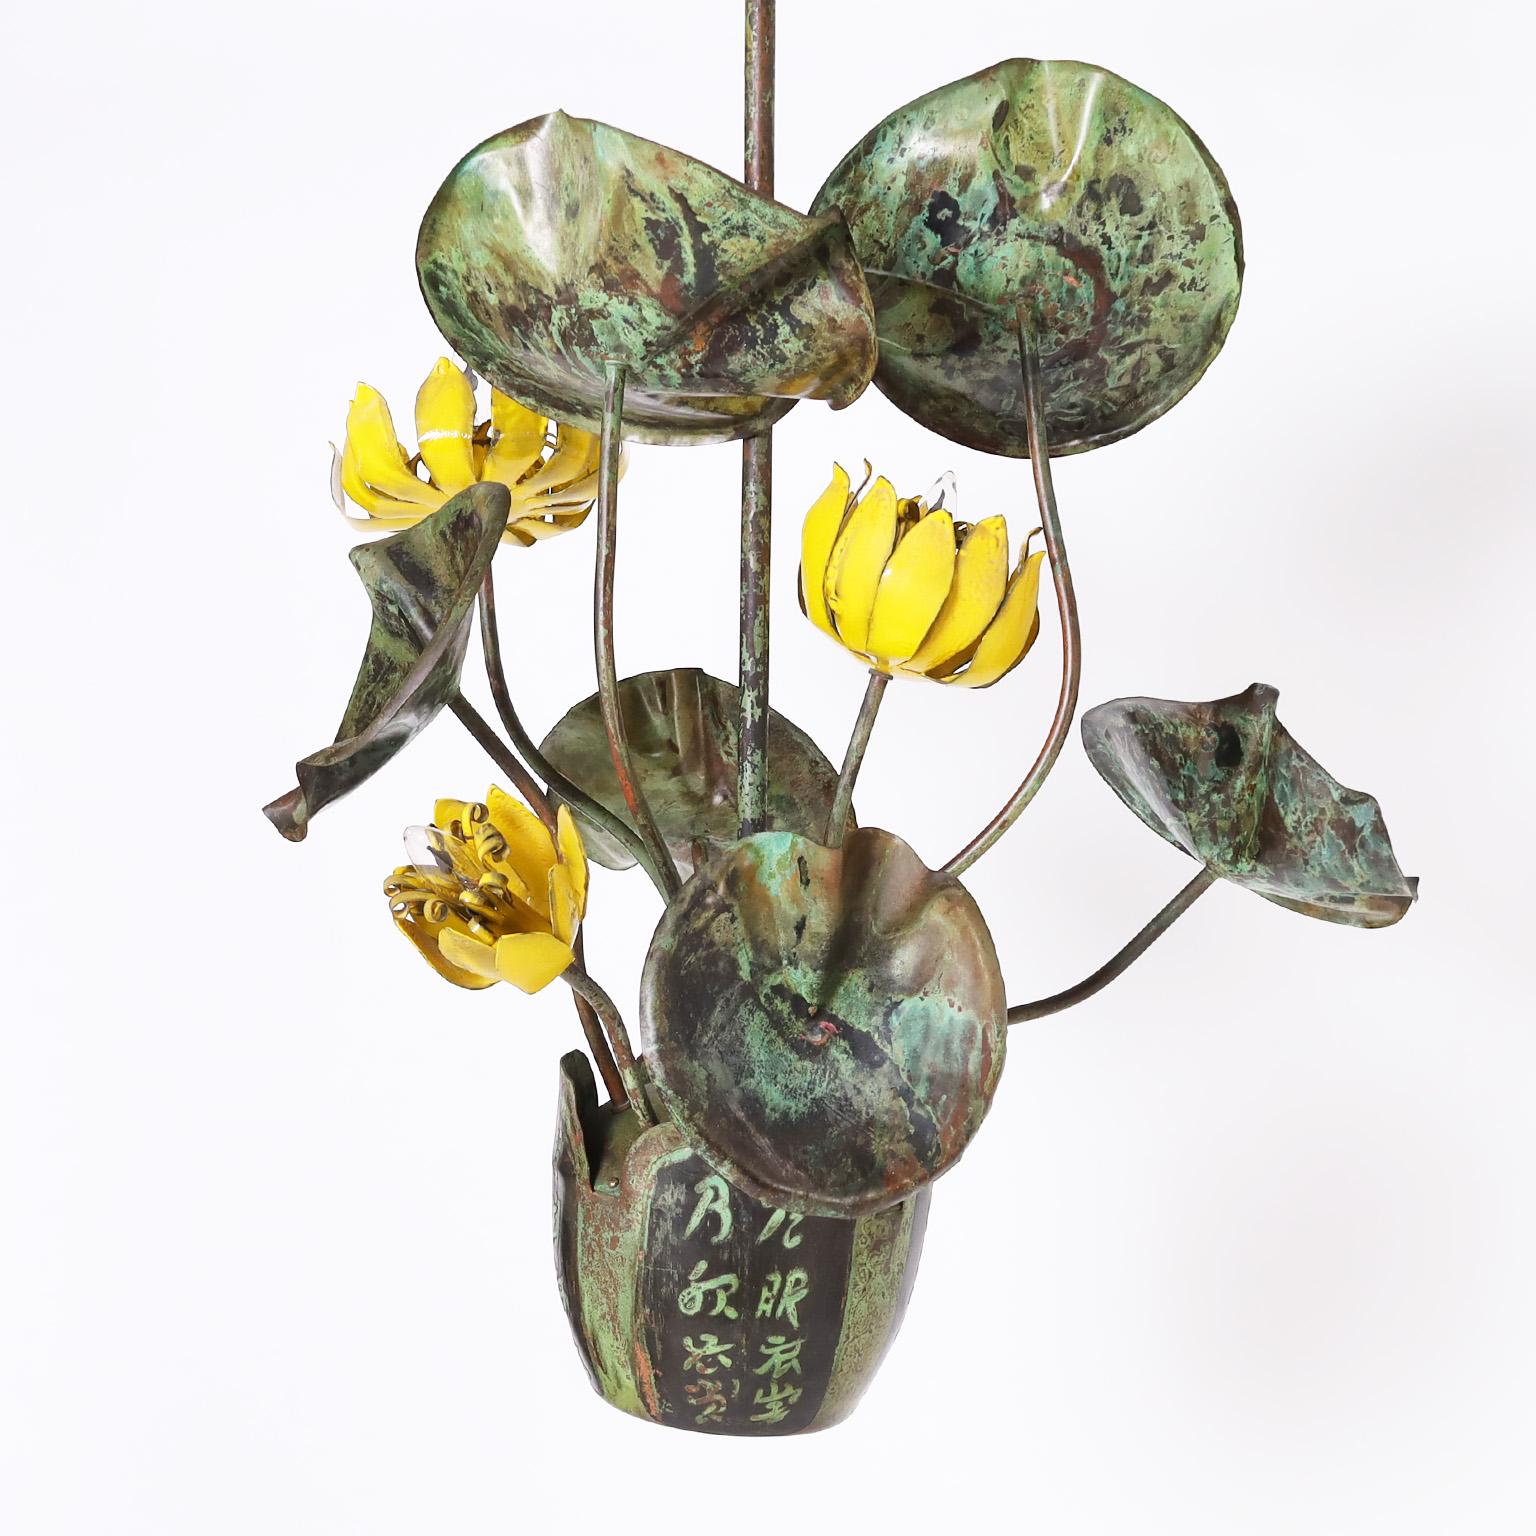 Standout Asian modern sculptural chandelier crafted with verdigris copper in an organic composition of leaves and enameled flowers in a pot with characters. Signed Garland on top of the pot.